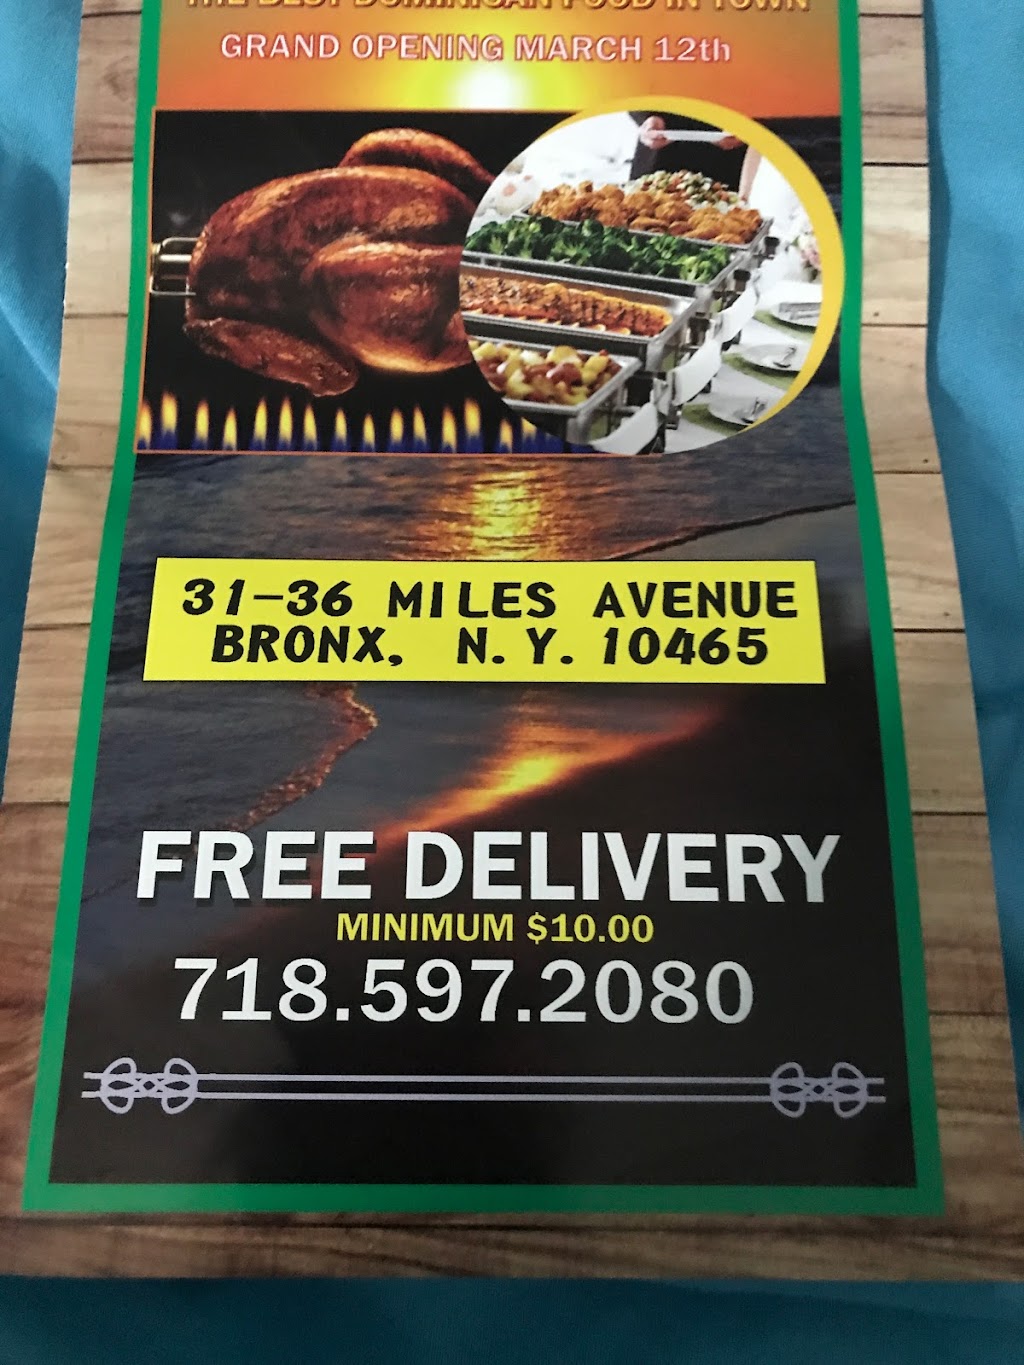 Sweeneys Grocery | 3136 Miles Ave, The Bronx, NY 10465 | Phone: (718) 597-2080